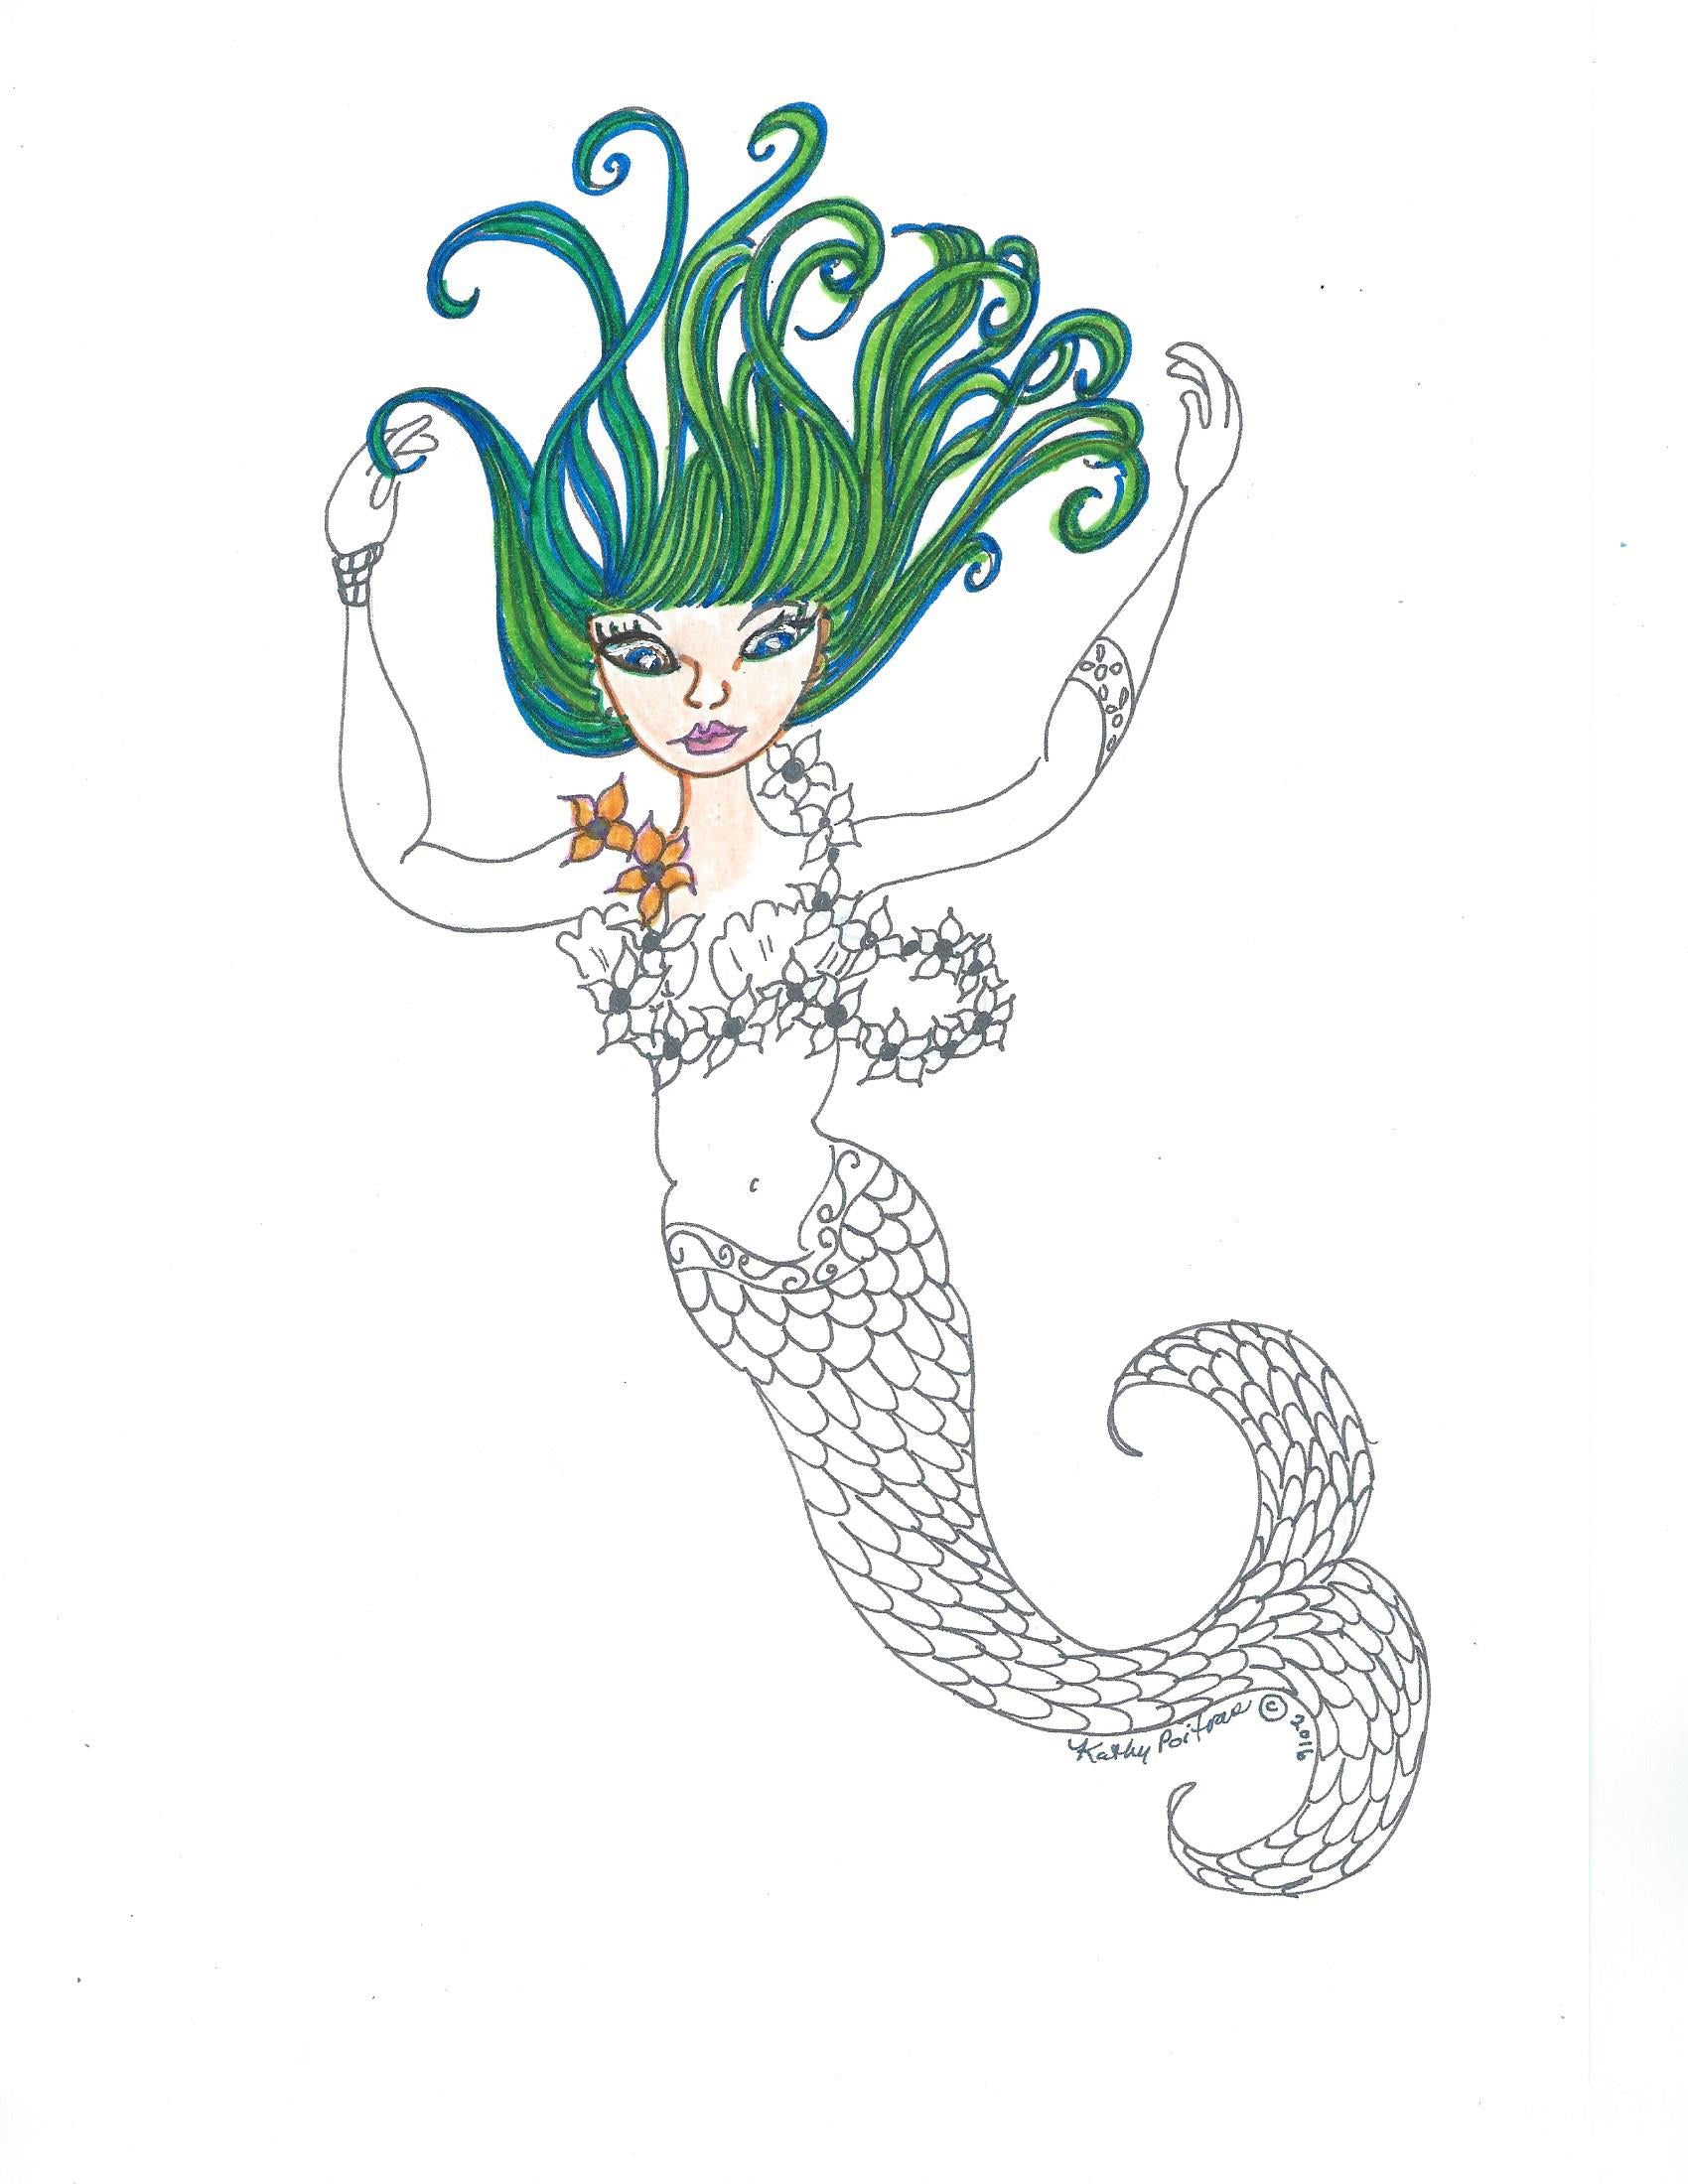 color your own sample of young mermaid with long hair floating up in the water.